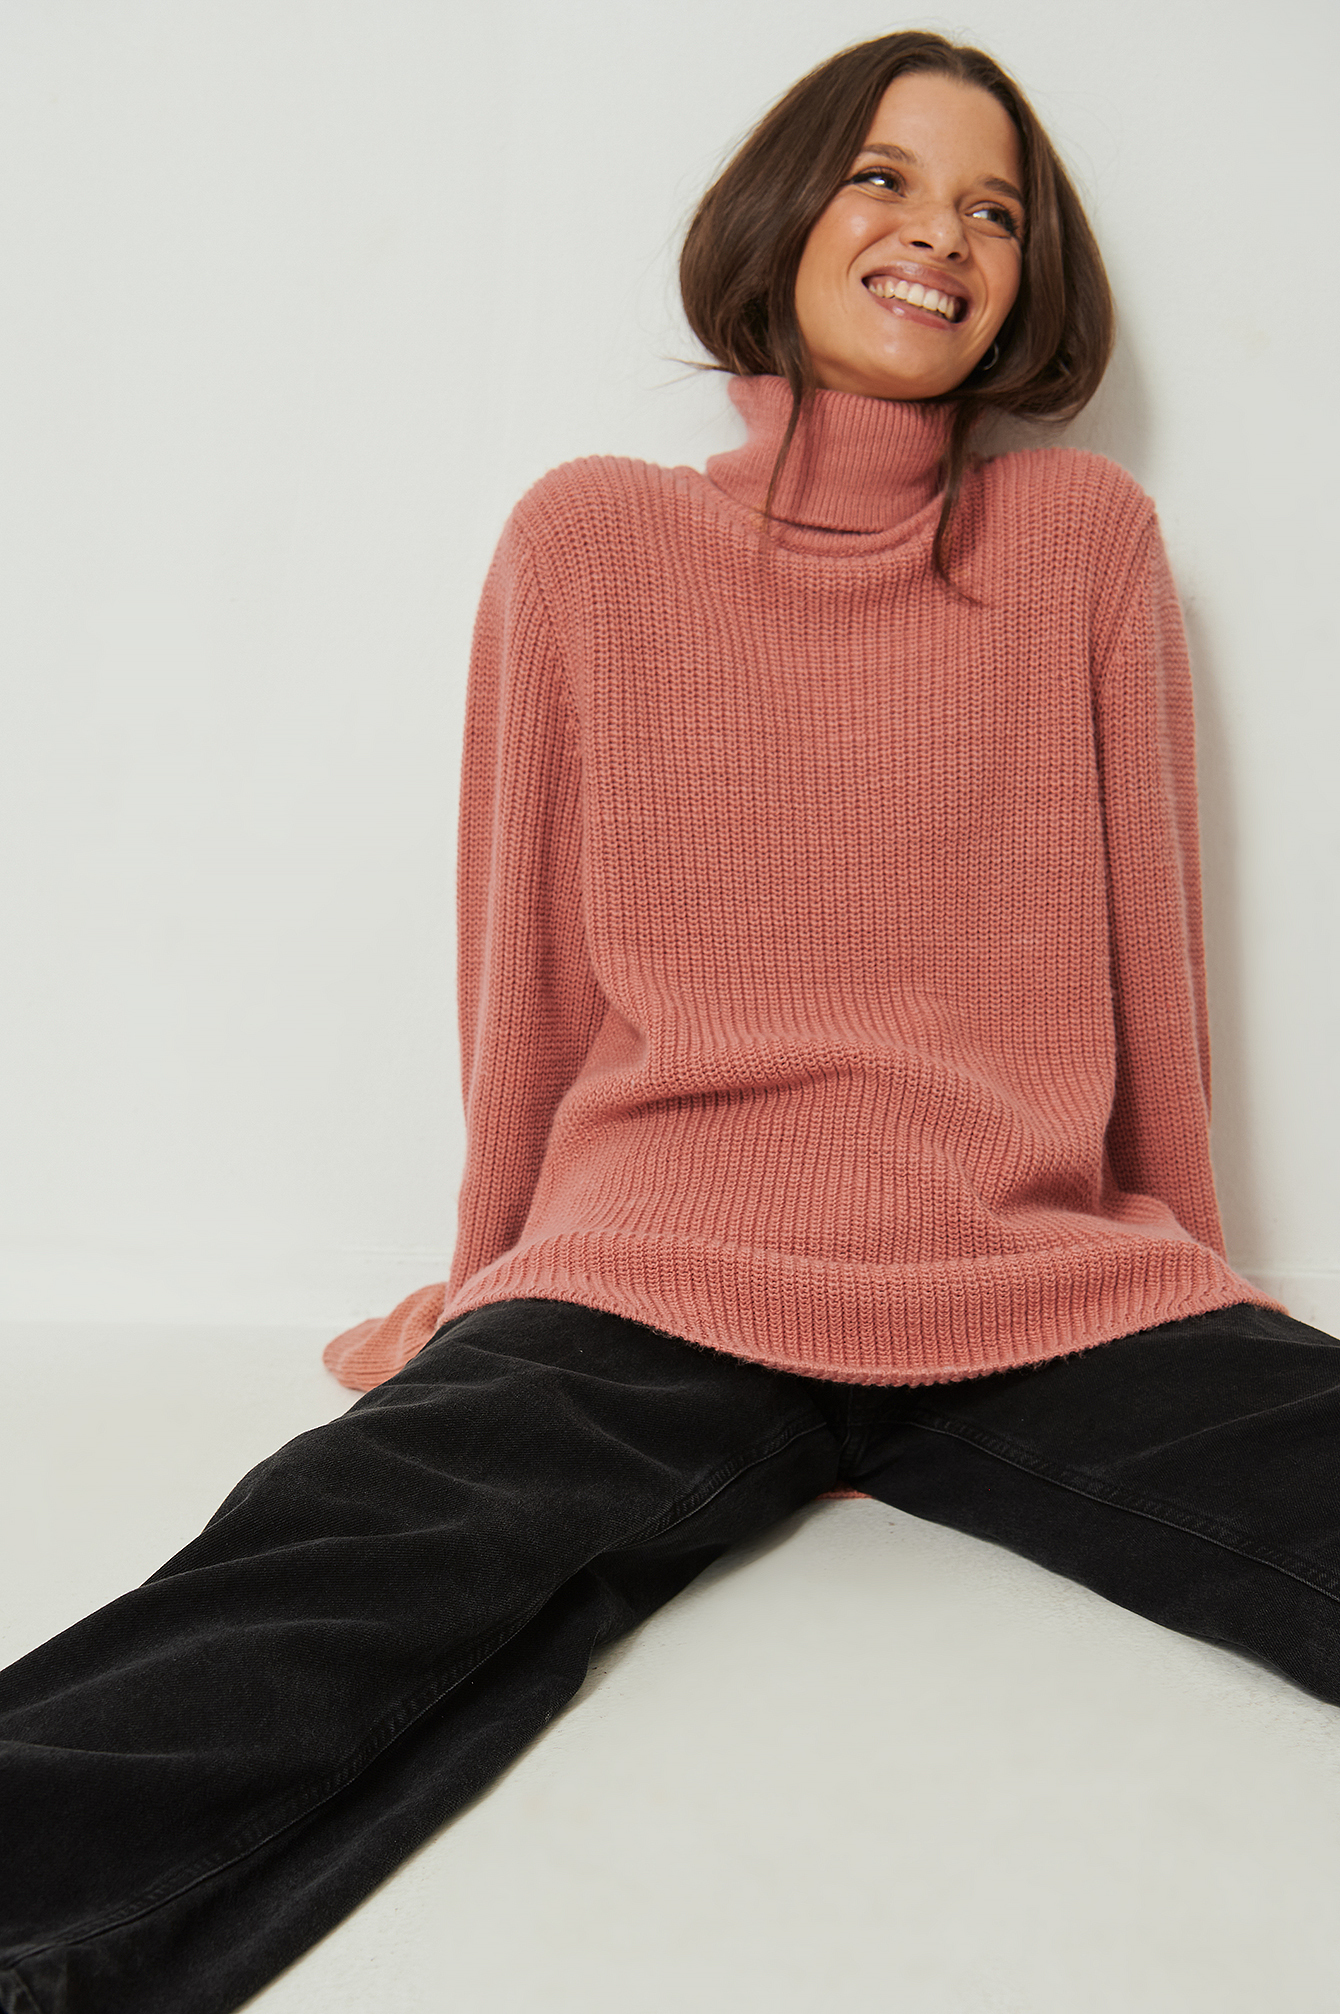 Ribbed High Neck Round Slit Sweater Outfit